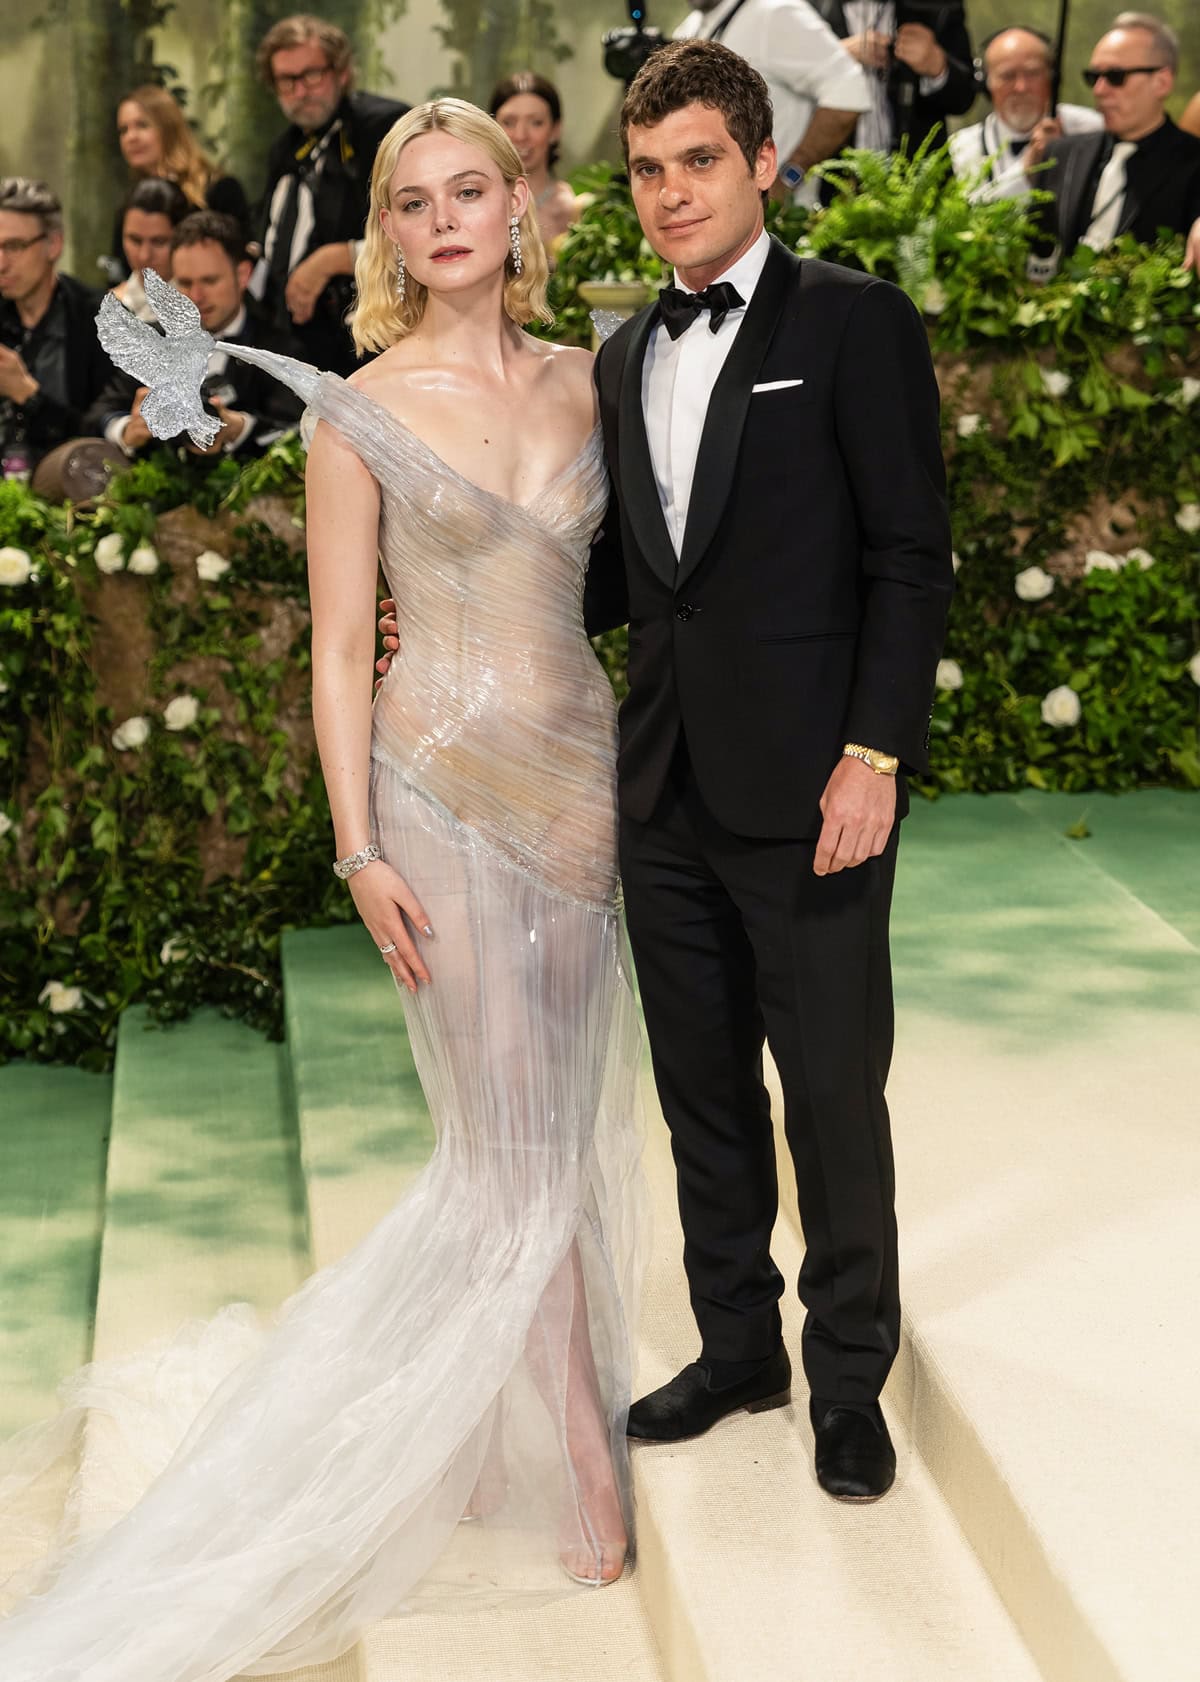 Elle Fanning, accompanied by boyfriend Gus Wenner, shines on the red carpet, her frosty-themed gown contrasting beautifully with his classic black suit